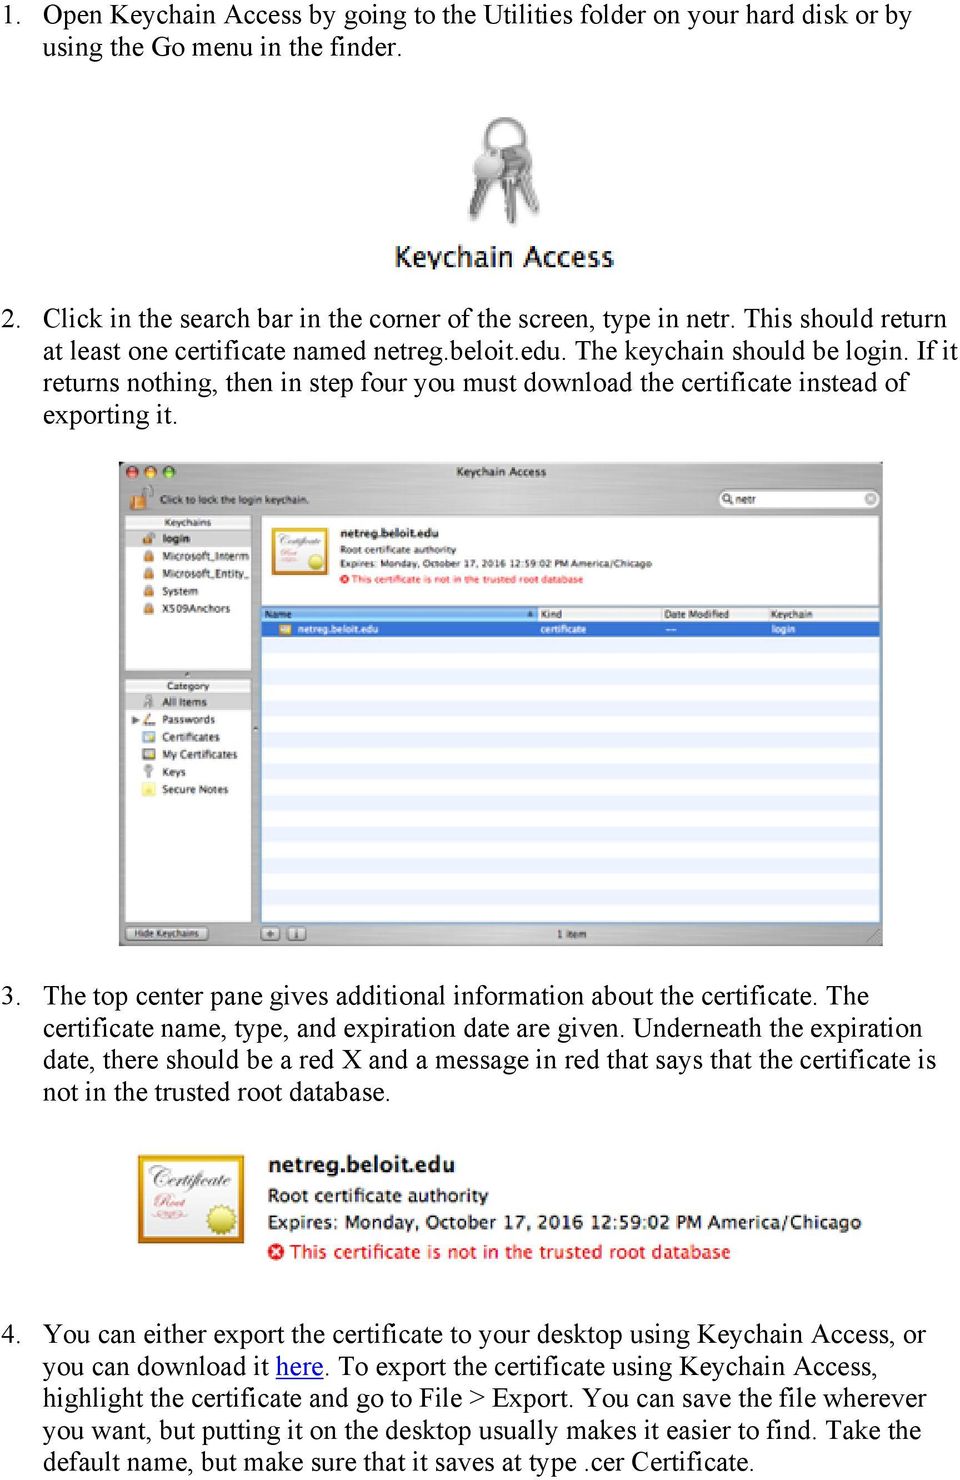 3. The top center pane gives additional information about the certificate. The certificate name, type, and expiration date are given.